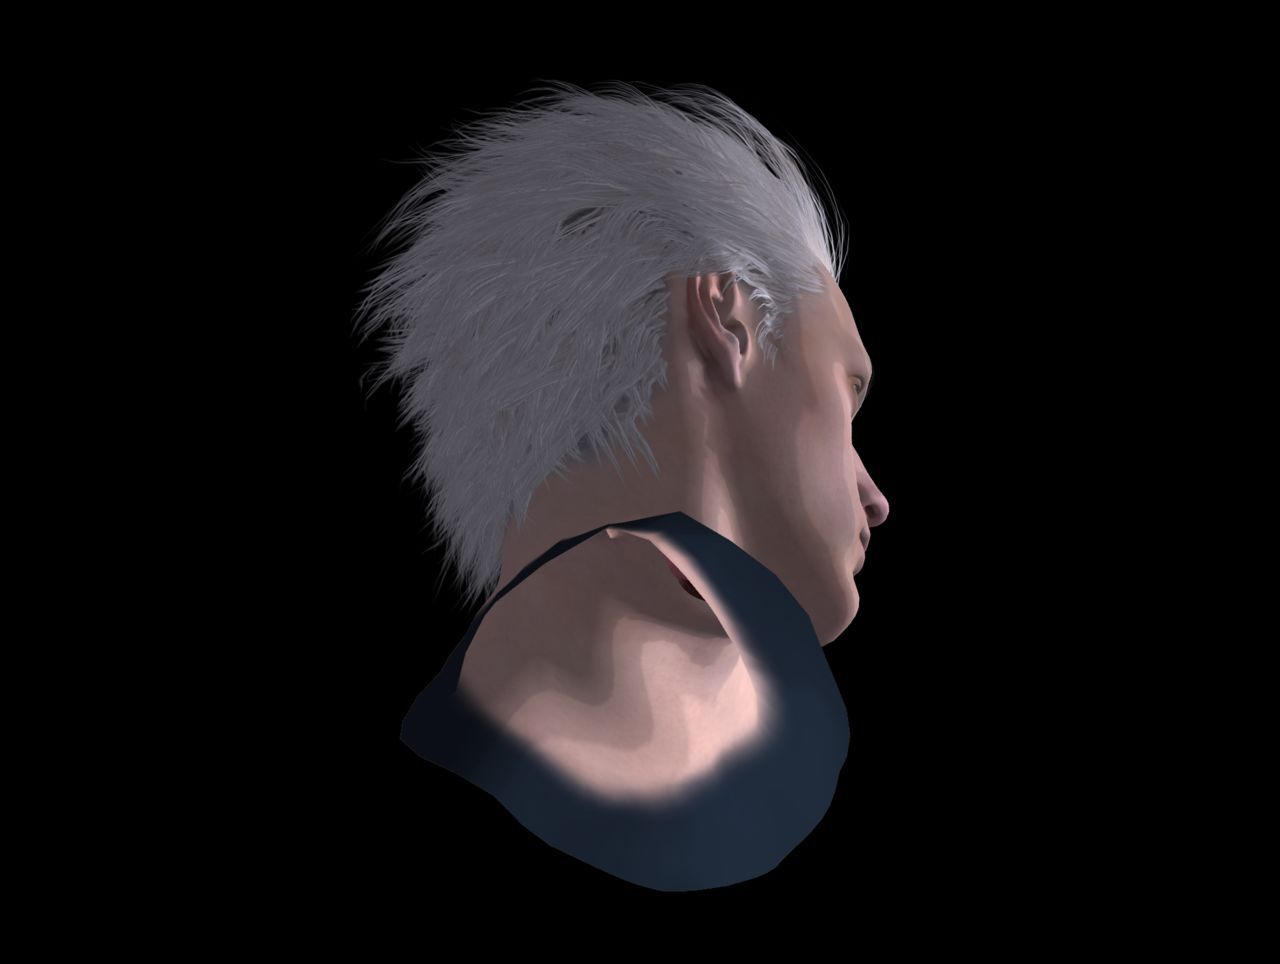 [J.A.] DMC5 | Vergil Head Reference PNG 22